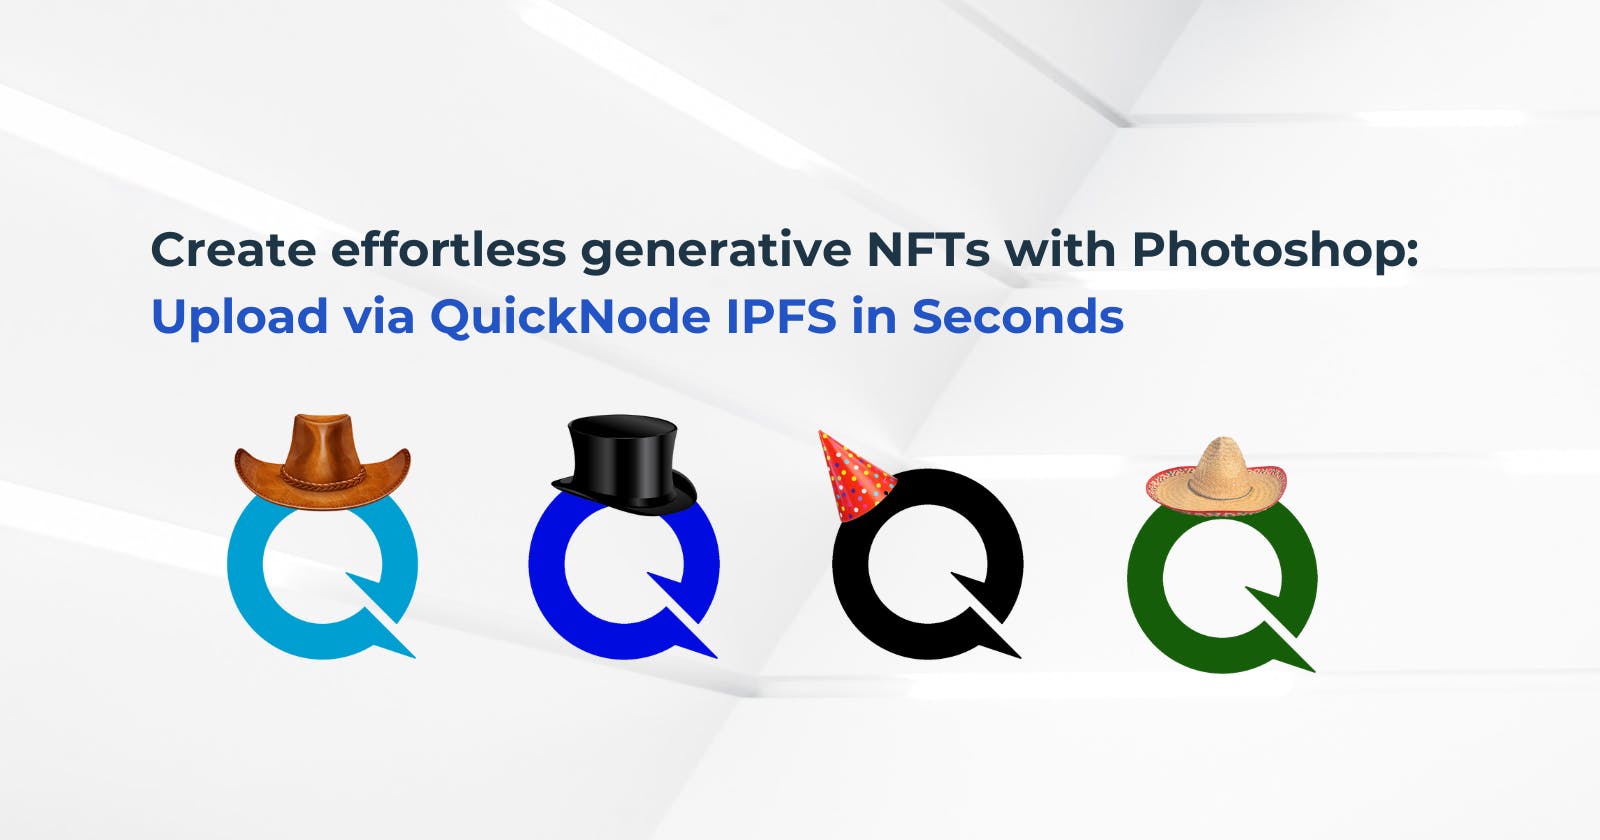 Create effortless generative NFTs with Photoshop: Upload via QuickNode IPFS in seconds